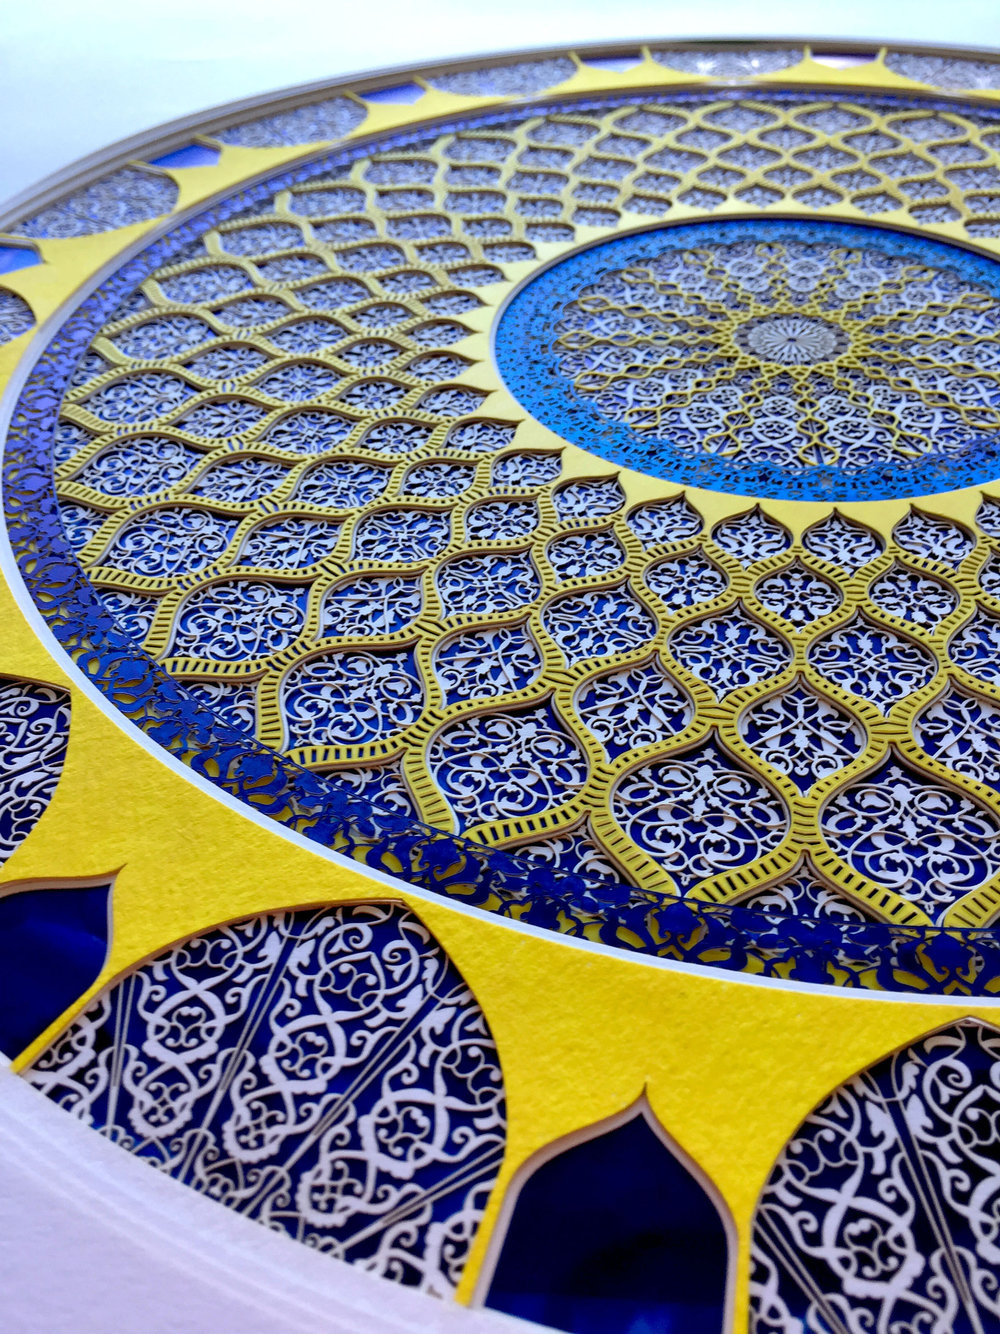 Untitled Study (Fahan) - 70cmx100cm - Lasercut paper over ink on